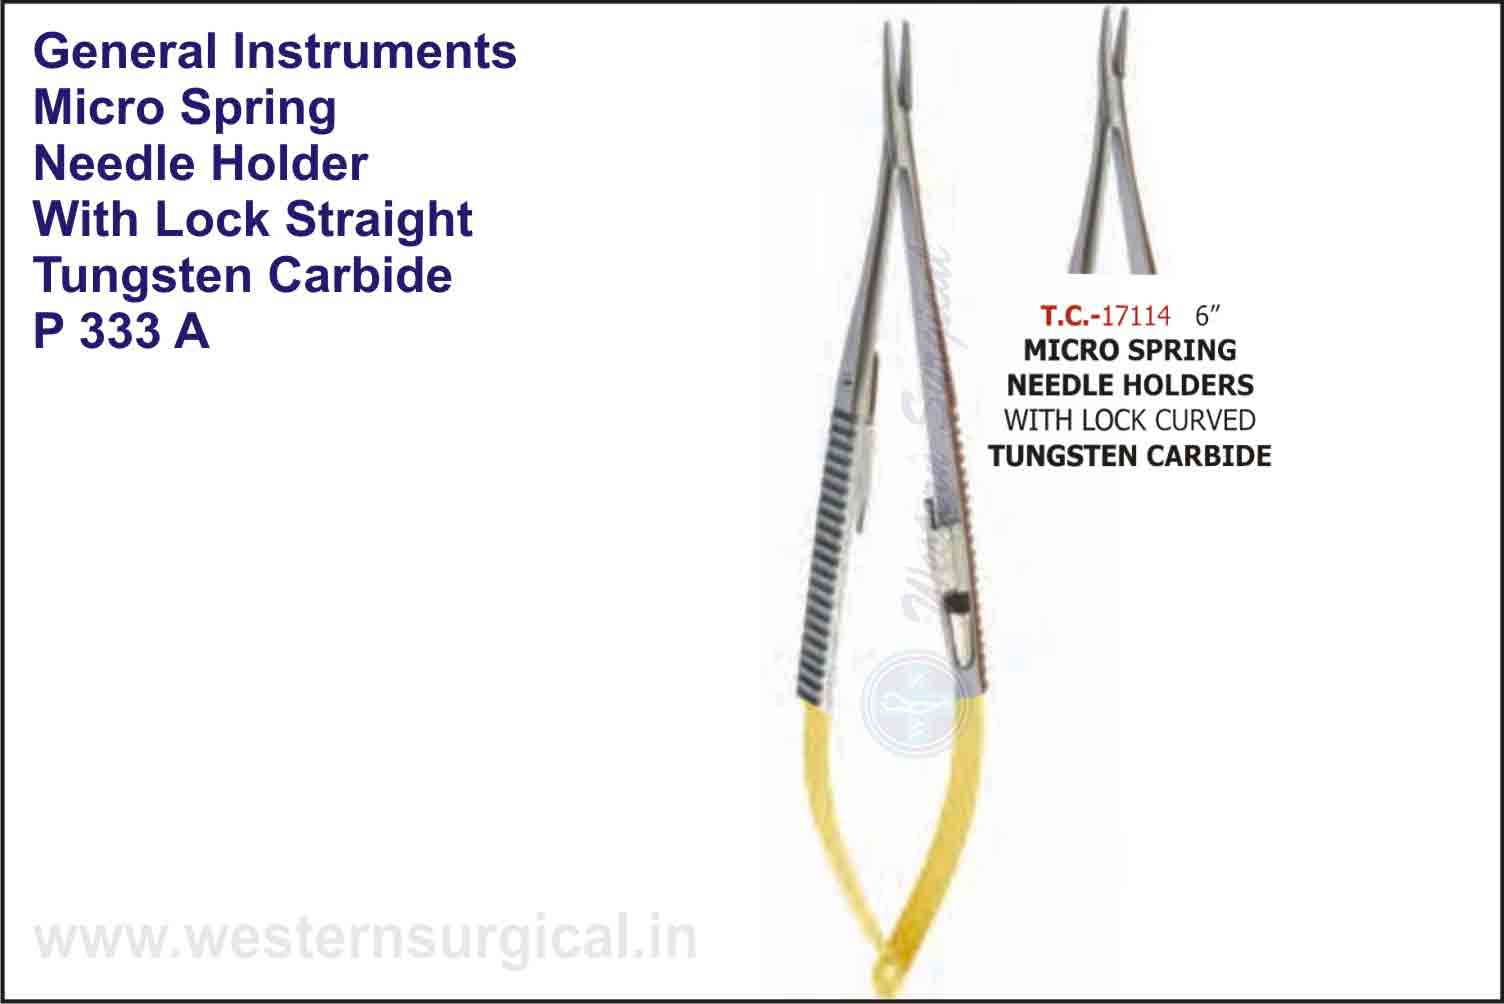 MICRO SPRING NEEDLE HOLDER WITH LOCK STRAIGHT & CURVED - TUNGSTEN CARBIDE